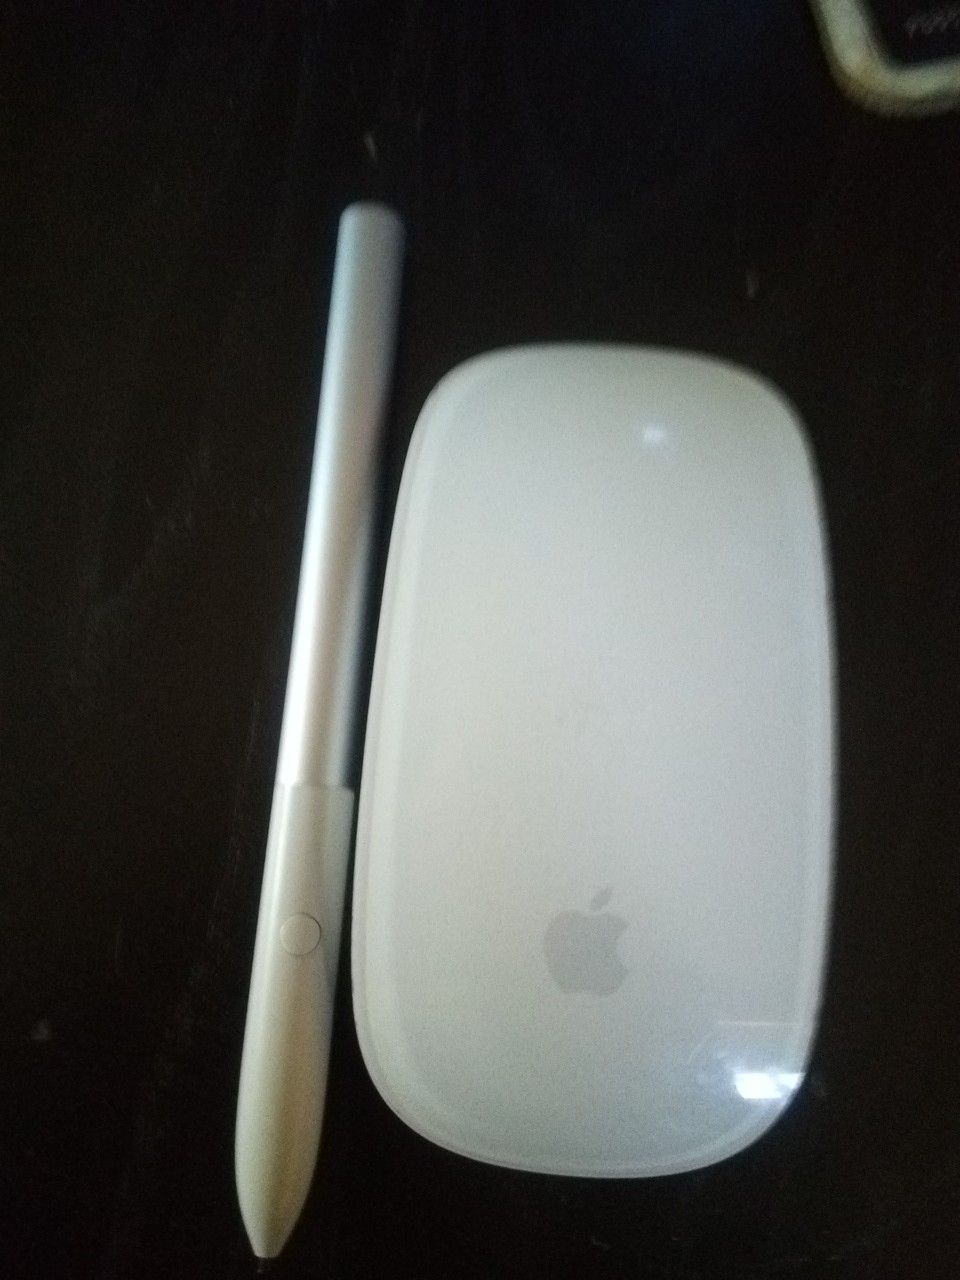 Apple wireless Mouse for Apple laptop and you have wireless pen for your touch screen laptop